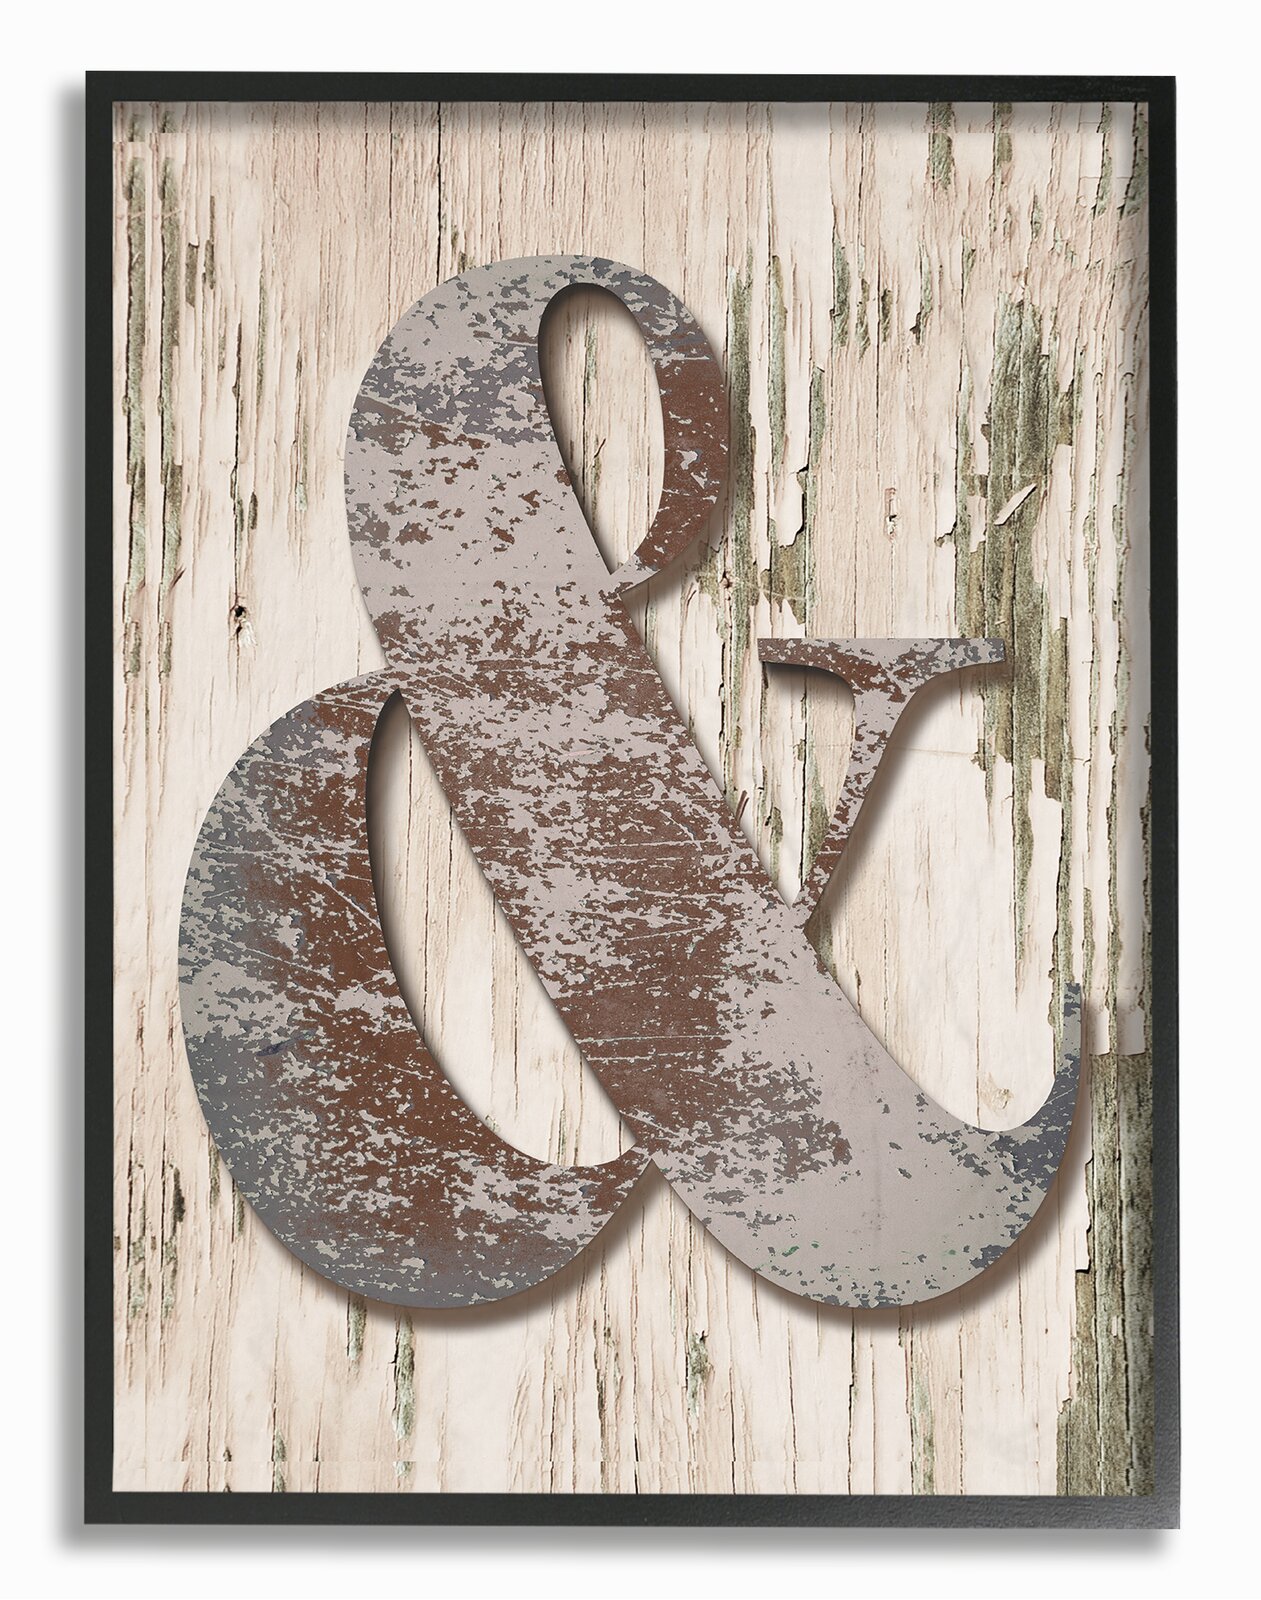 'Distressed Wood and Patina Ampersand' by Daphne Polselli - Textual Art Print on Canvas